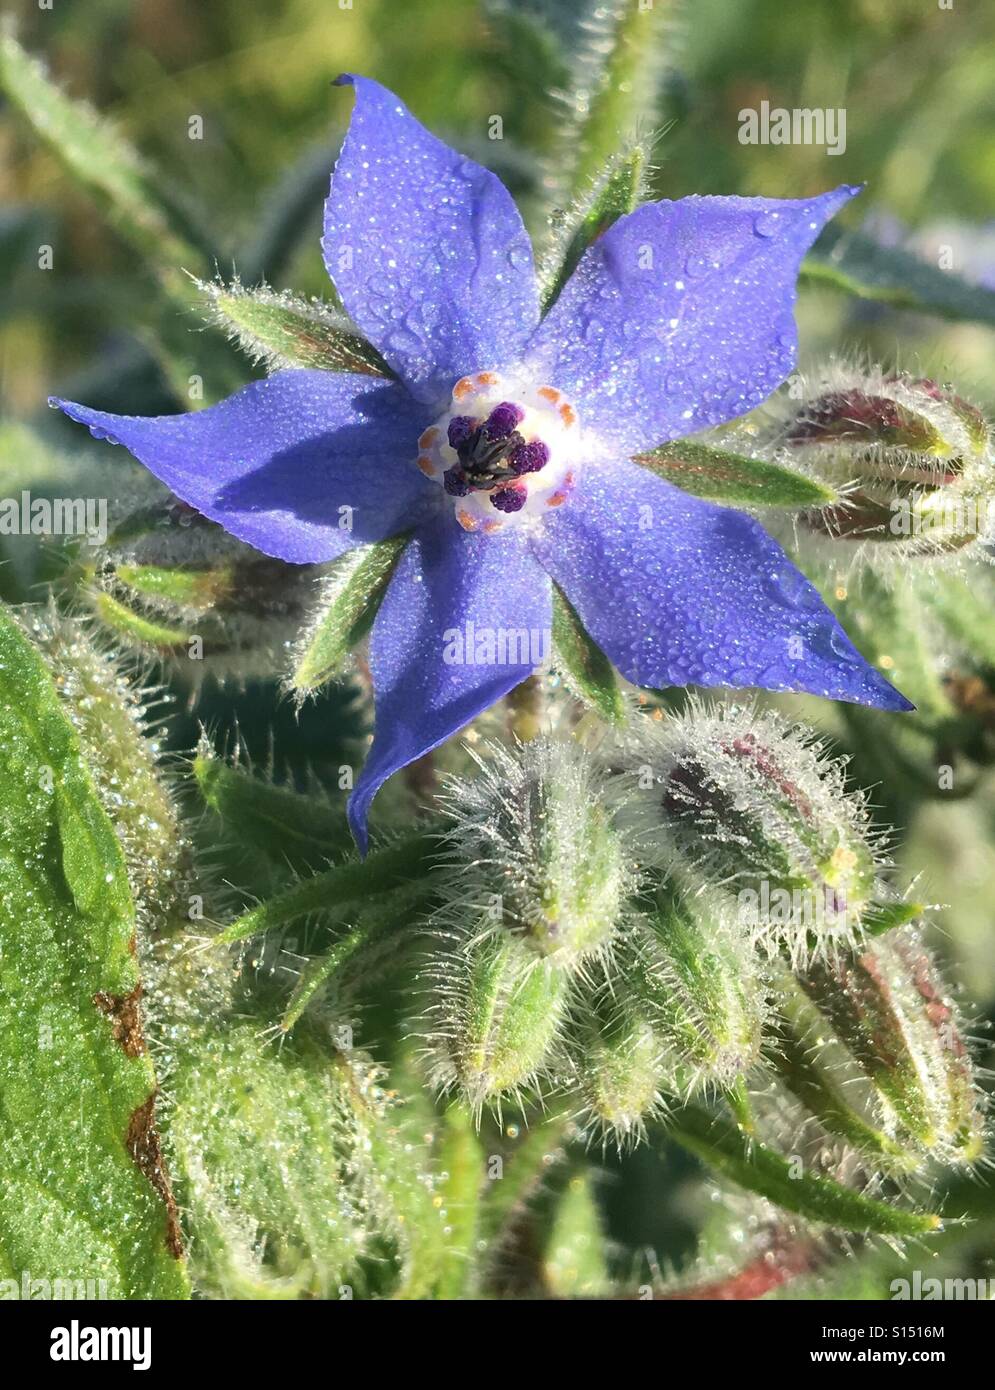 Patterns in Nature - Borage or starflower. Bright blue flower and hairy flower buds with dew drops on a bright morning Stock Photo